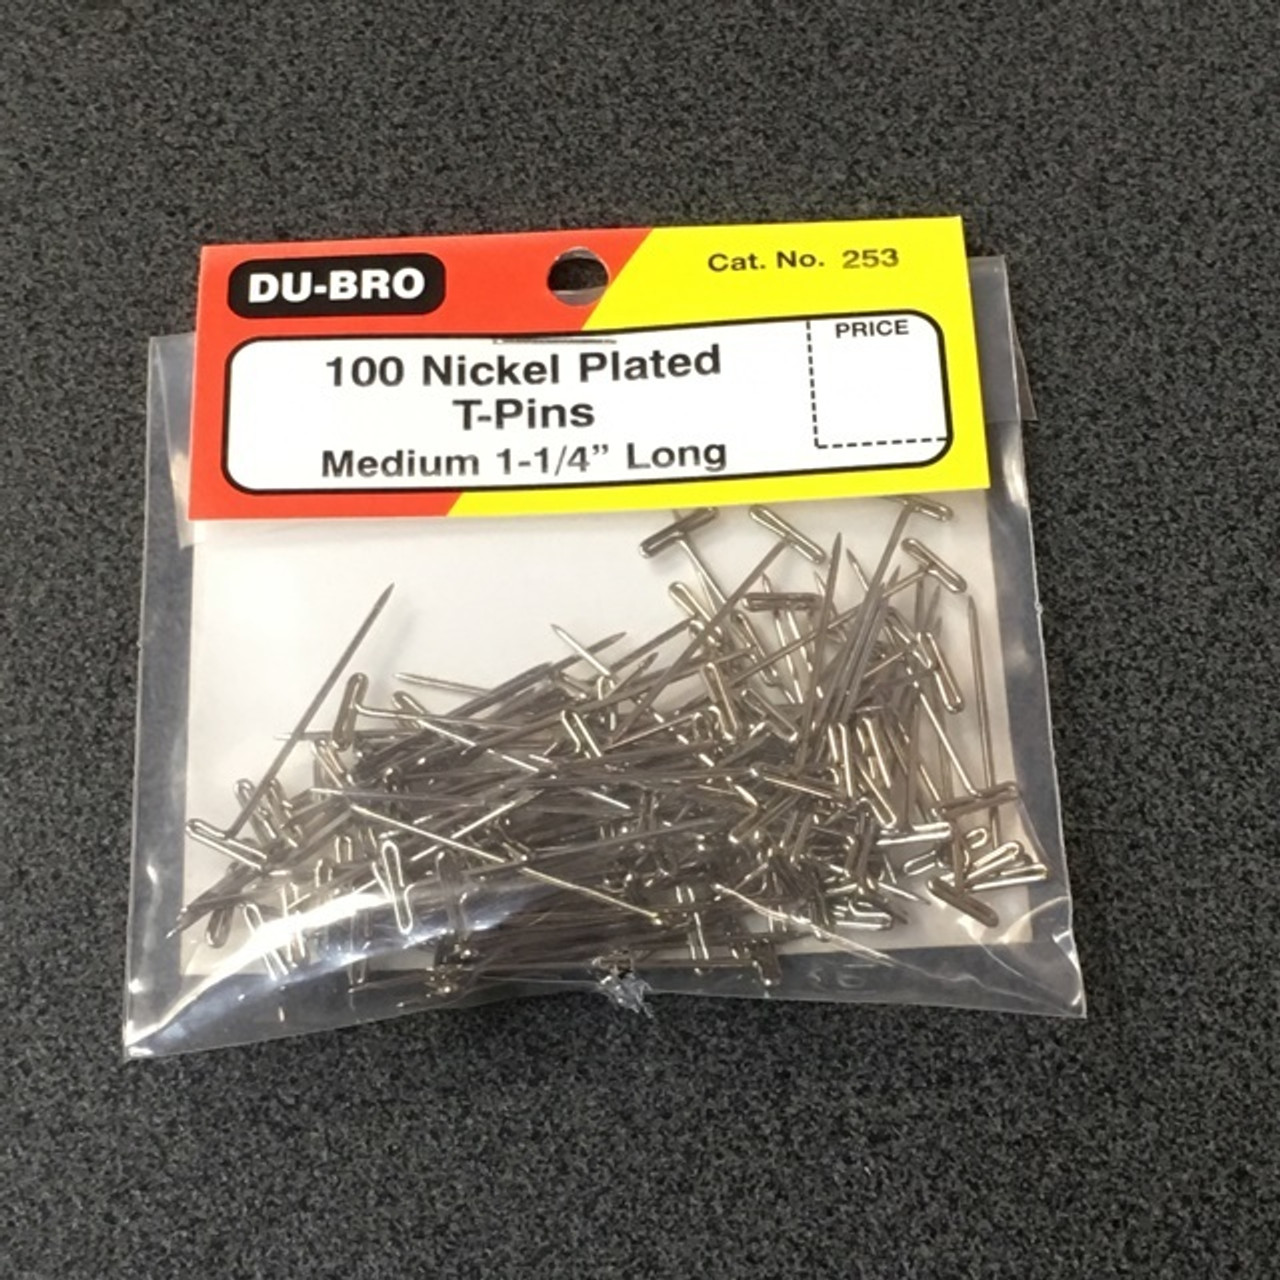 Nickel Plated T-Pins 1-1/4 Inch Long DUBRO253 - WIngs over the